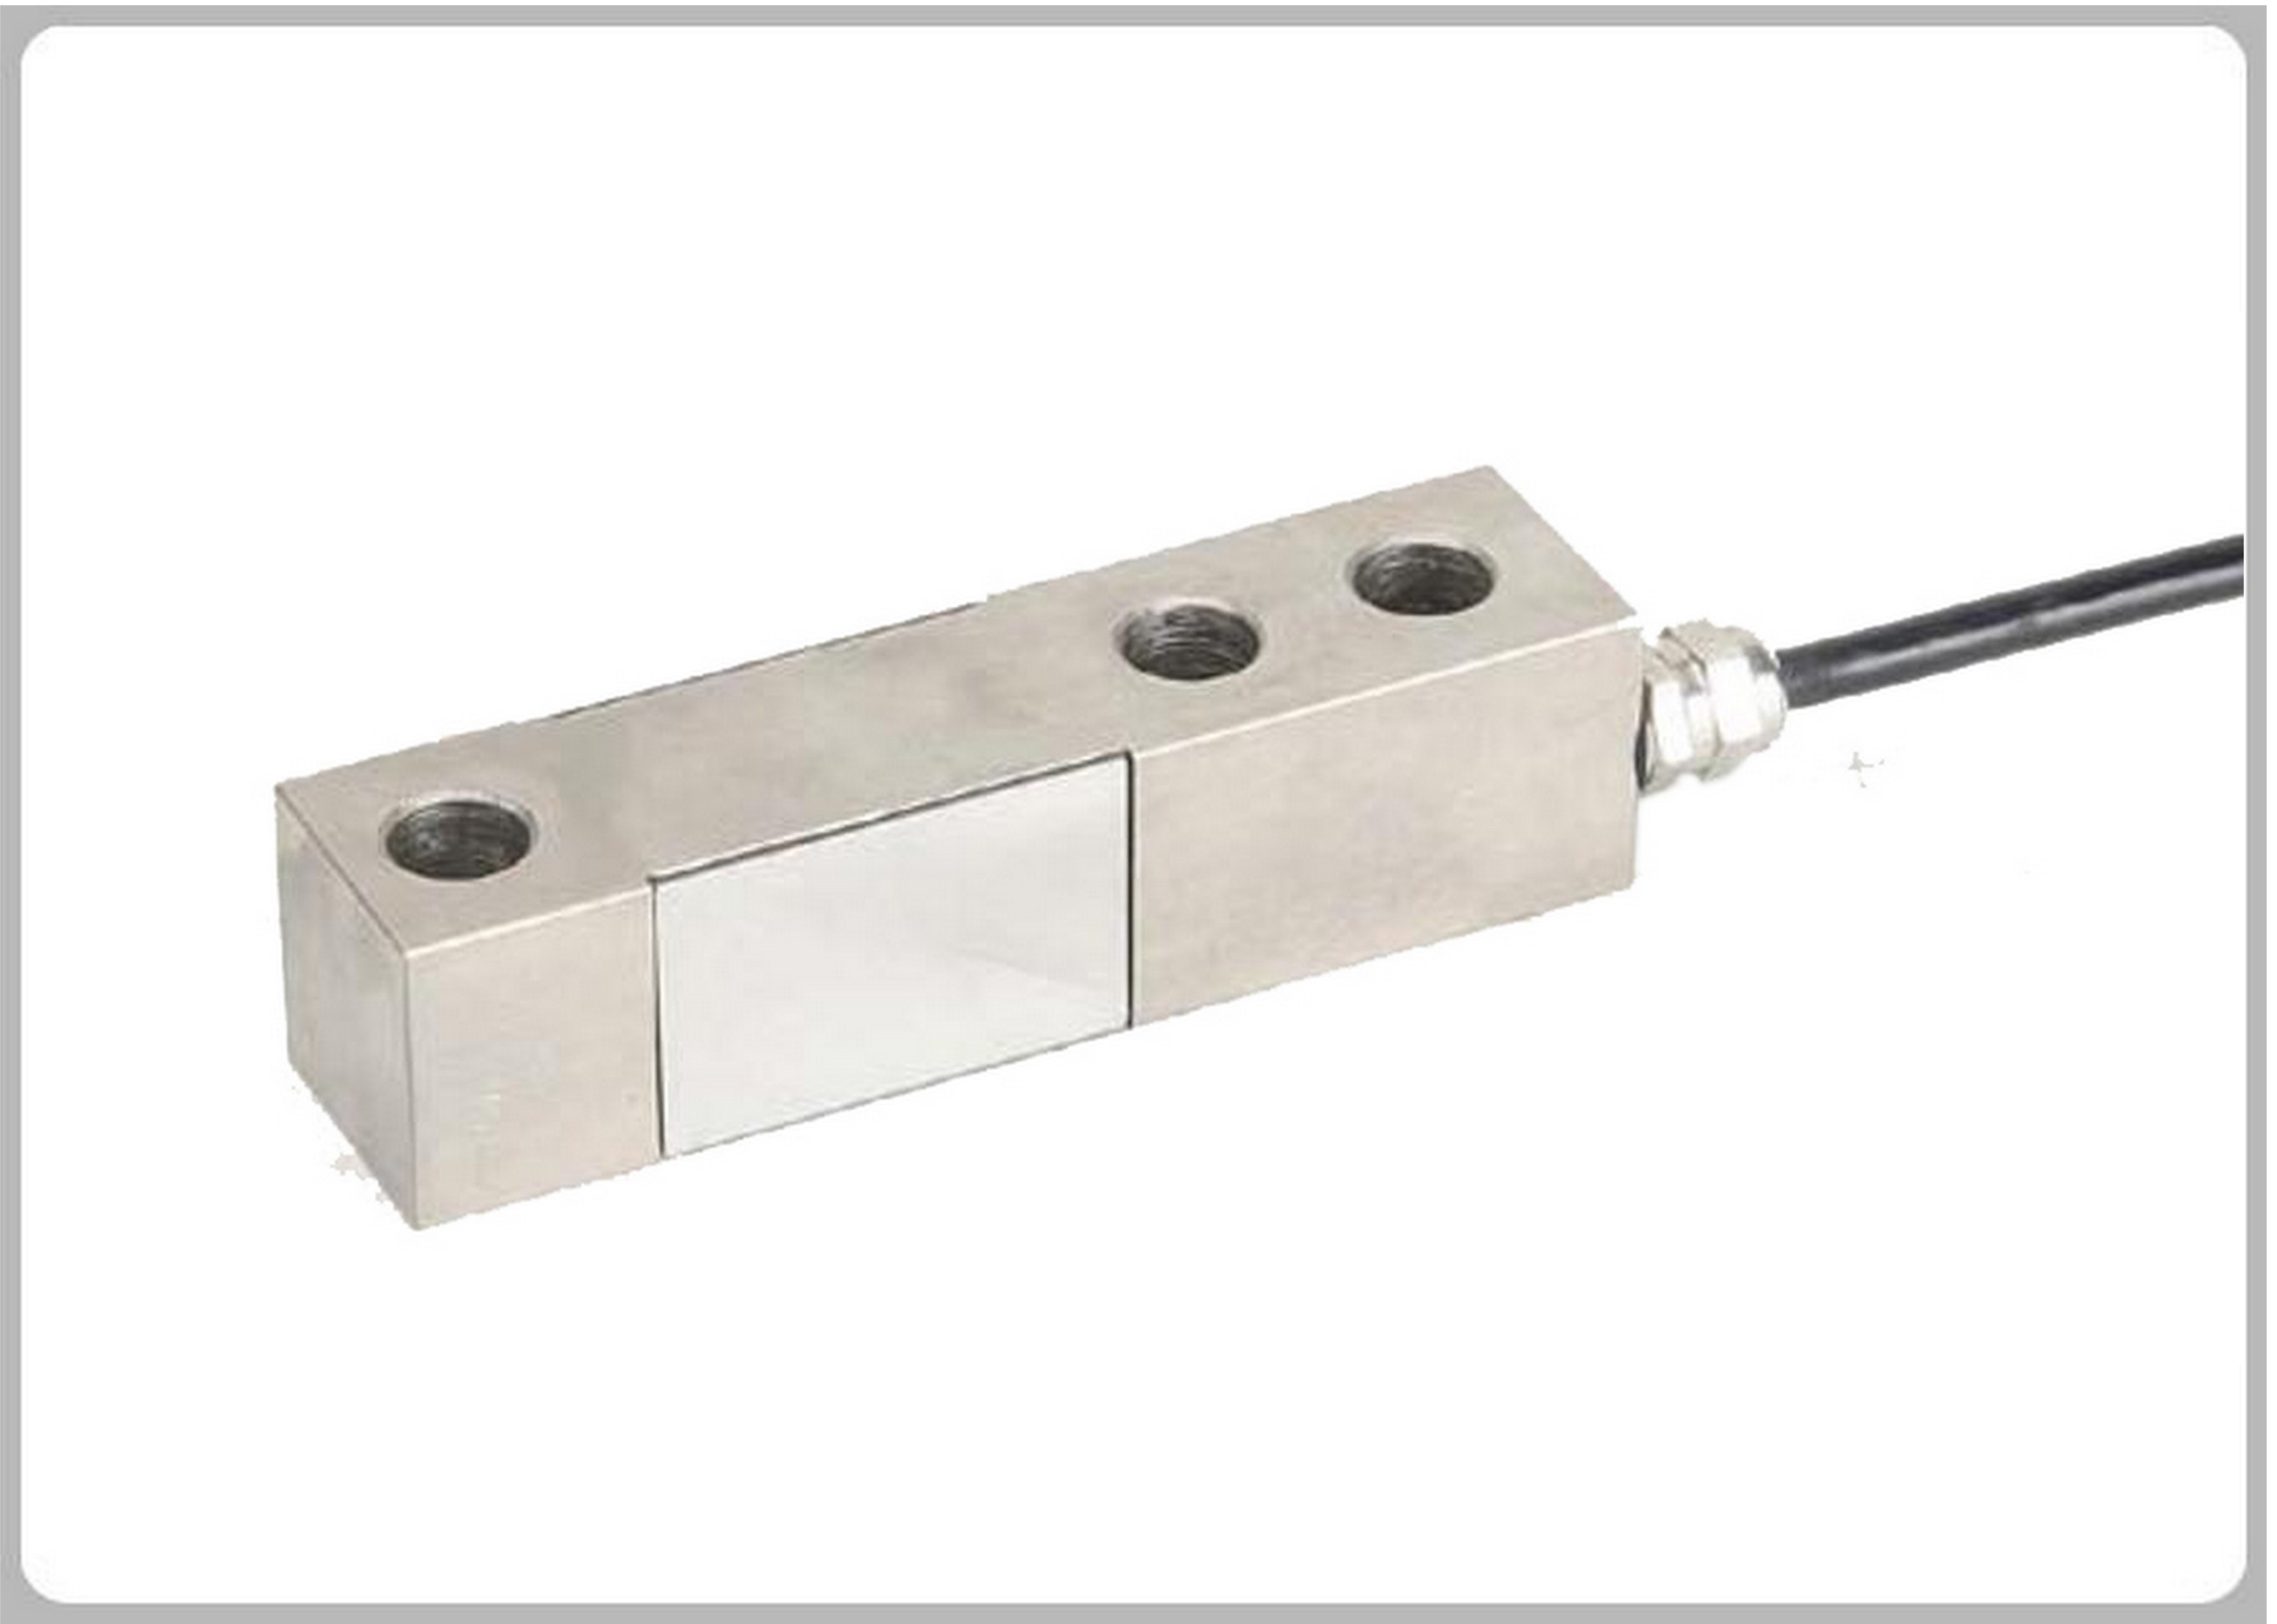 MC8407 LOAD CELL & FORCE TRANSDUCER